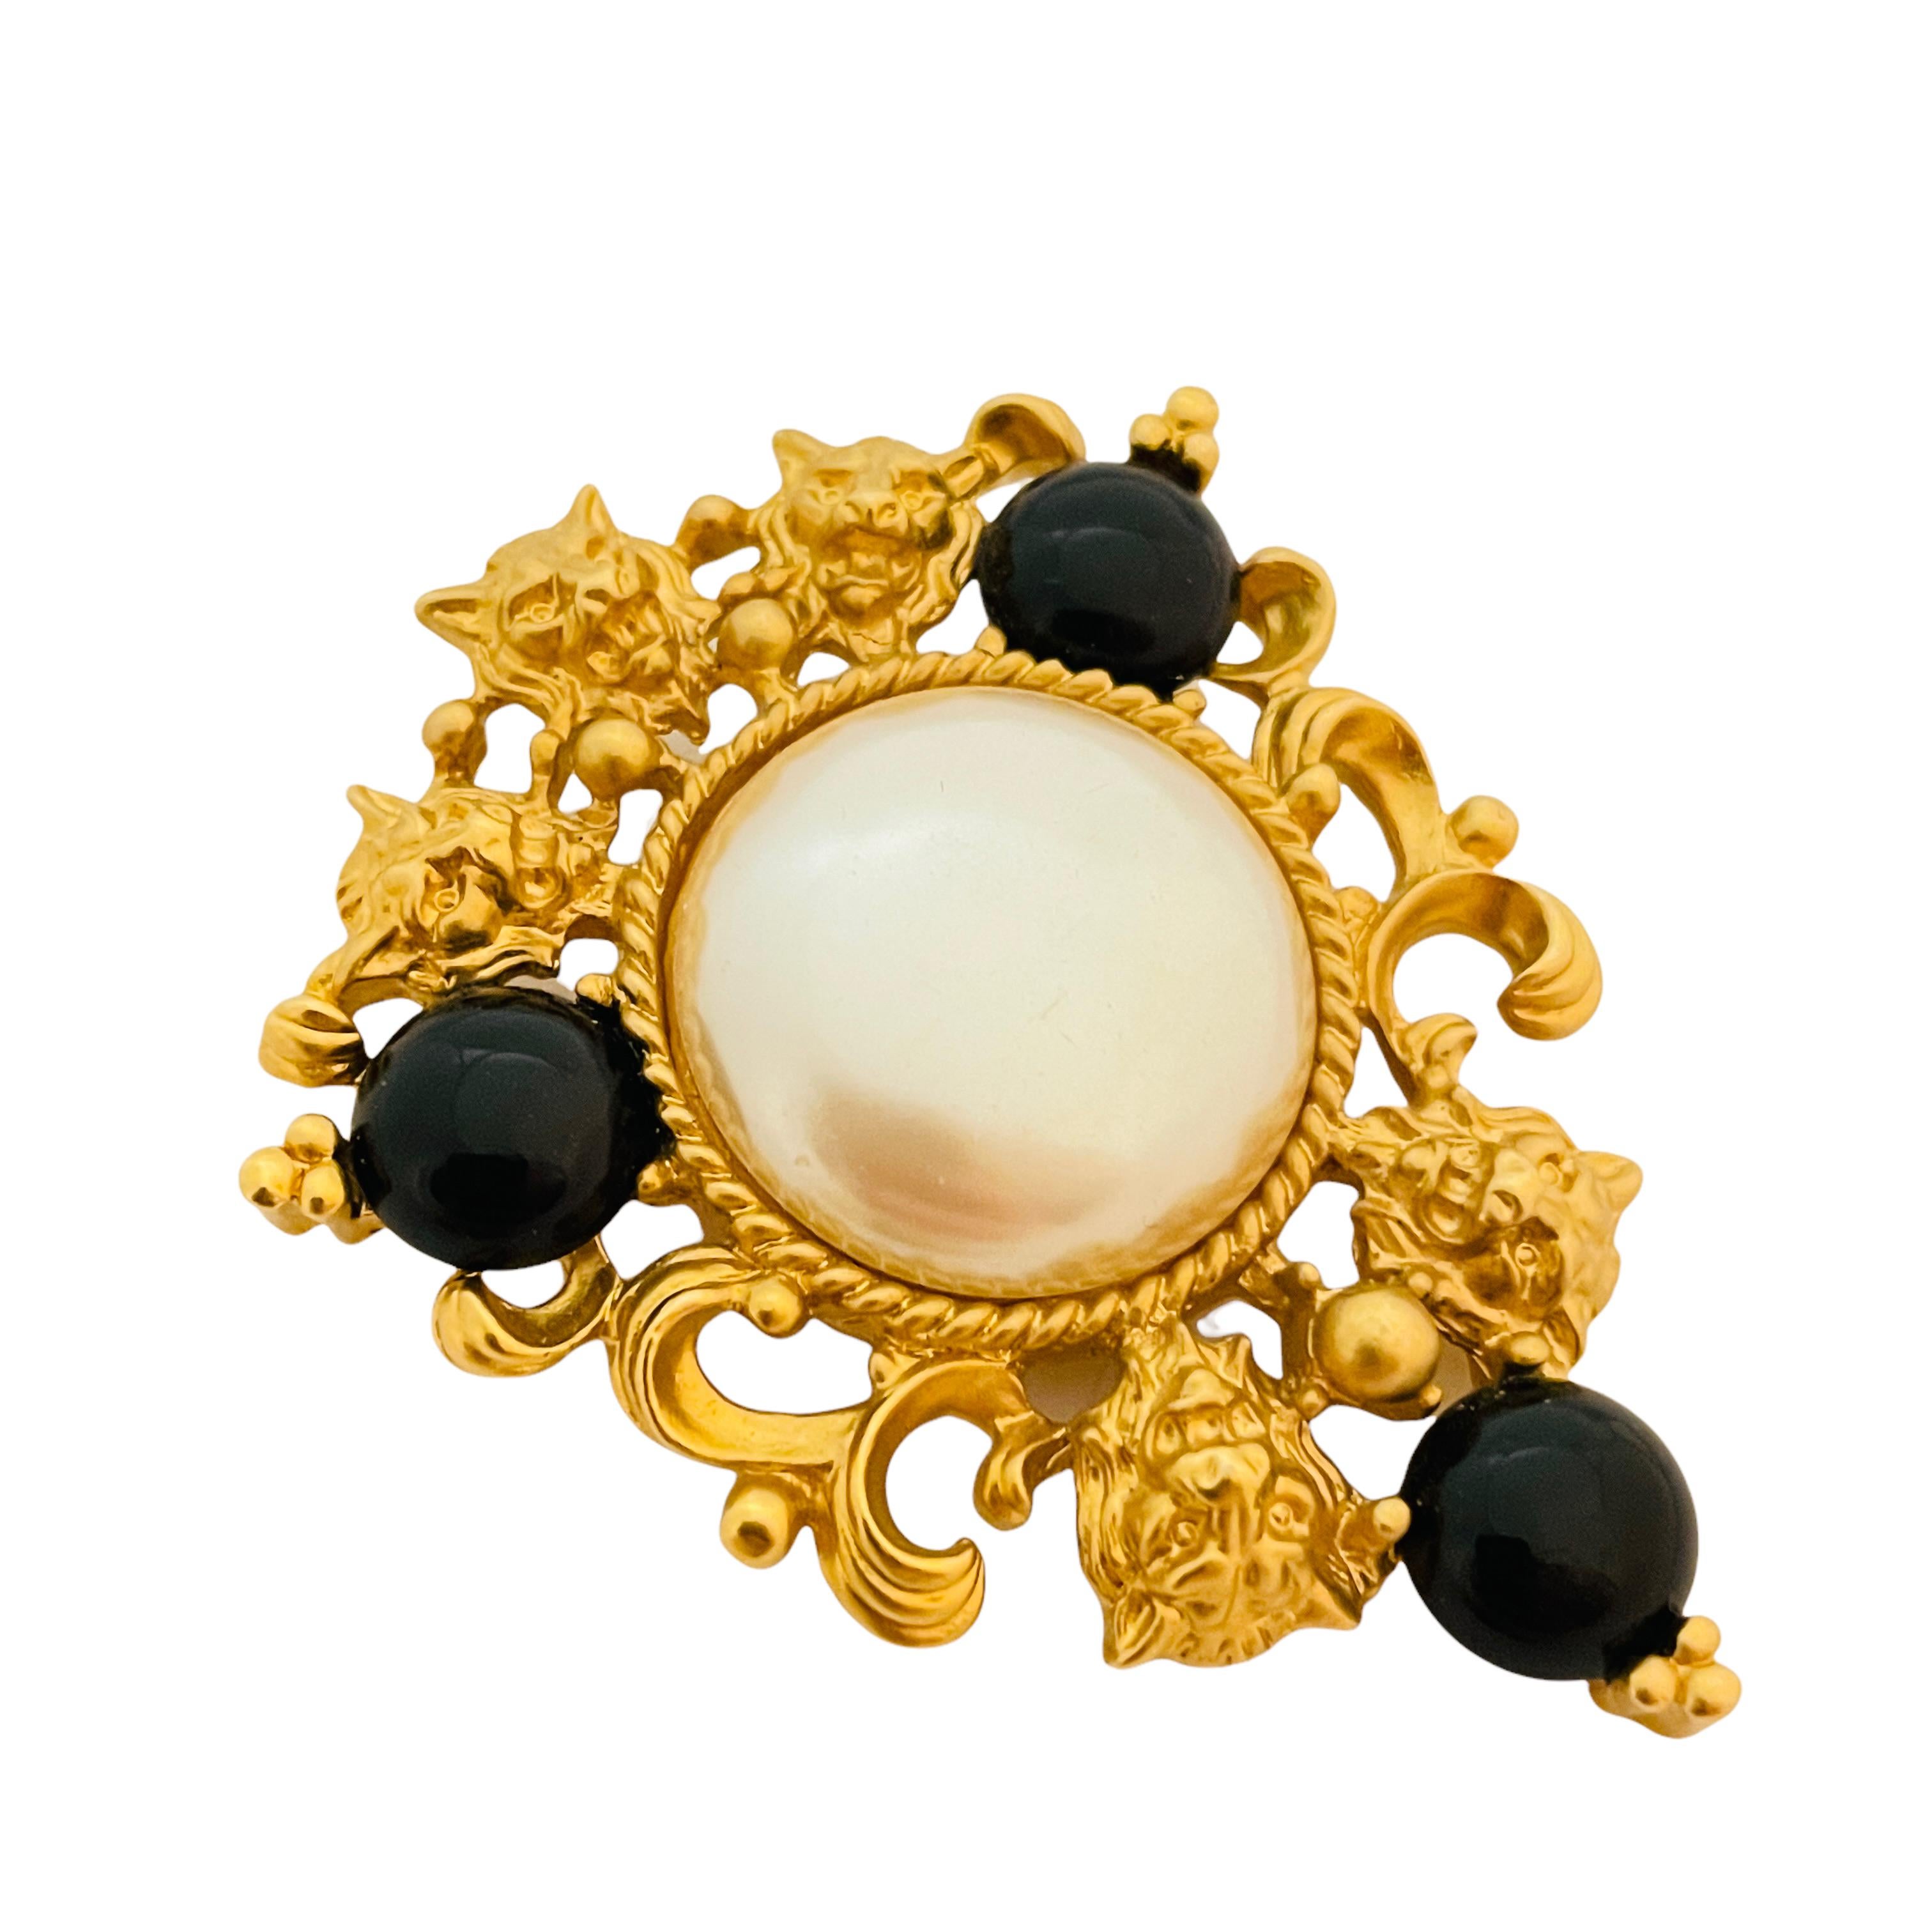 DETAILS

• signed avon

• gold tone with pearls and black cabs

• vintage designer runway brooch

MEASUREMENTS

• 2.25